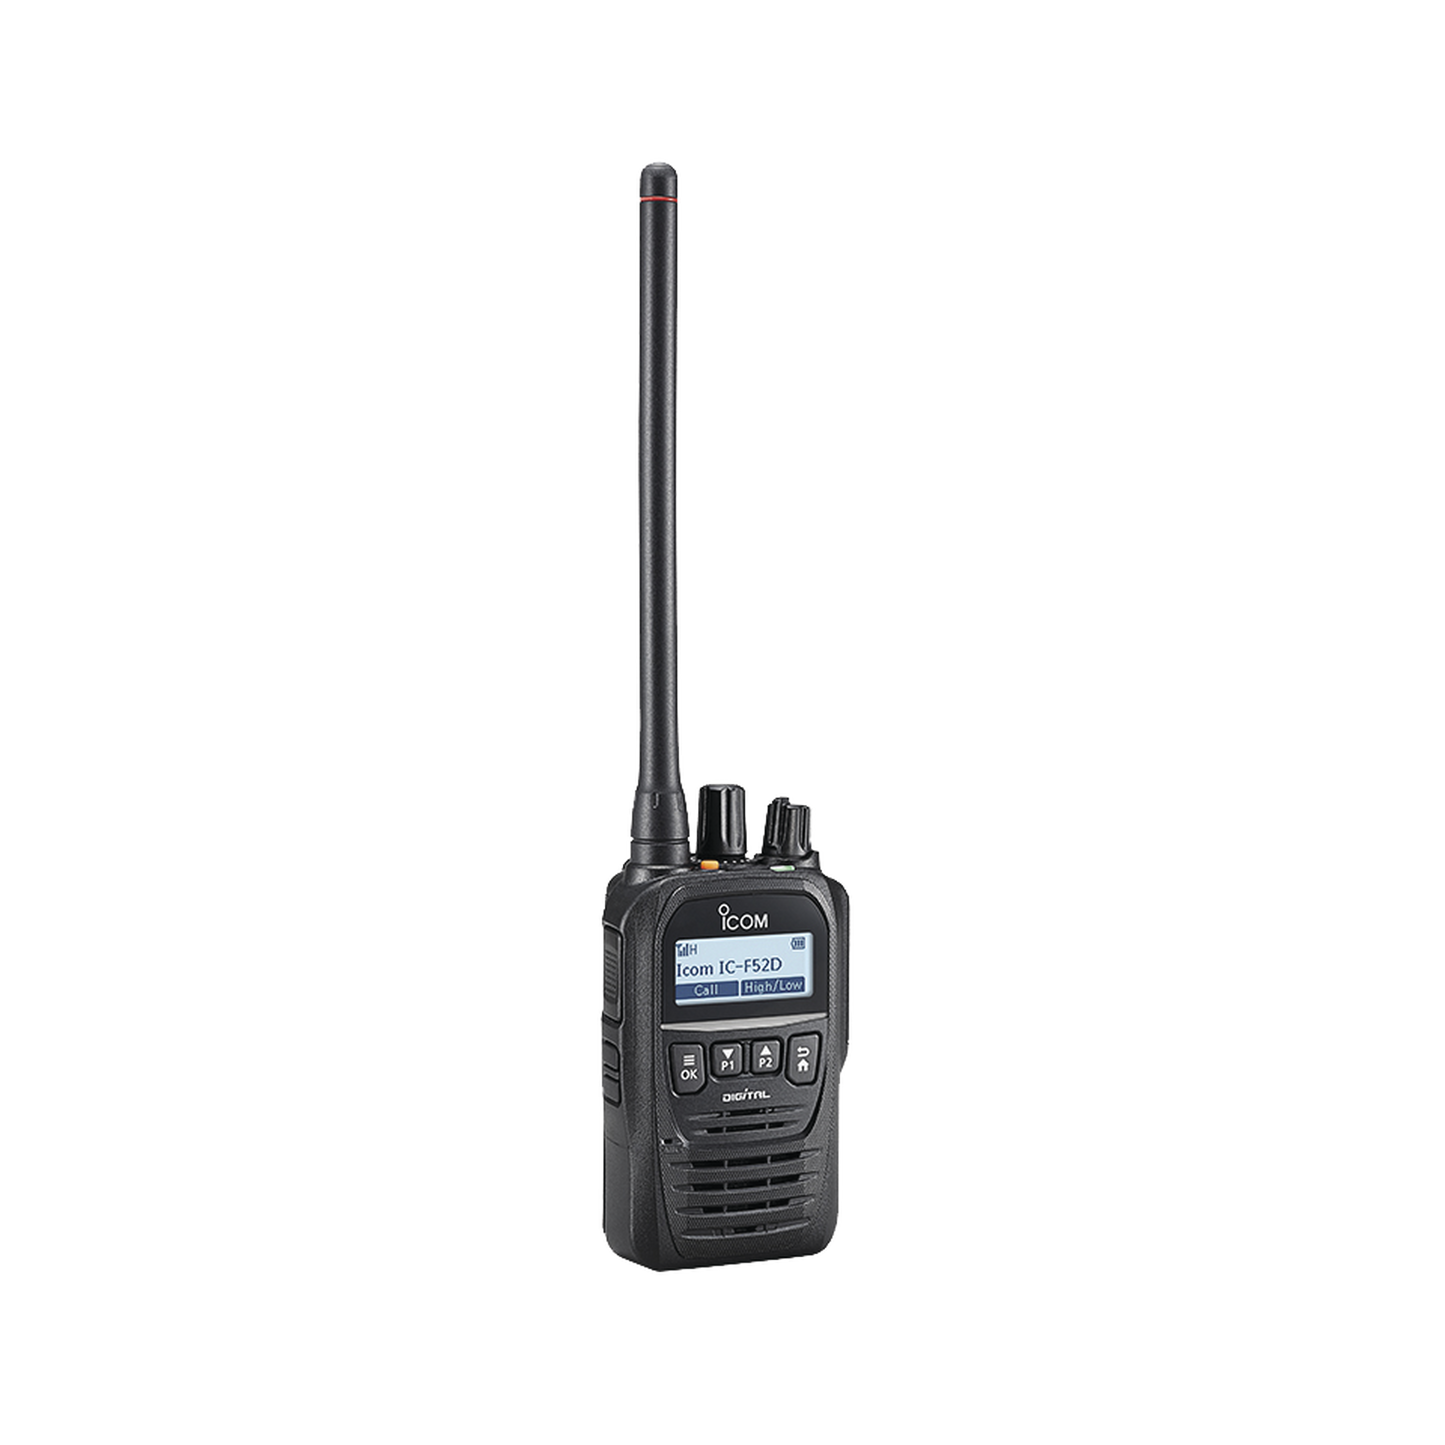 Intrinsically Safe Radio with 512 channels, on range 136-174MHz, sumersible, bluetooth built in. Supplied with Battery,